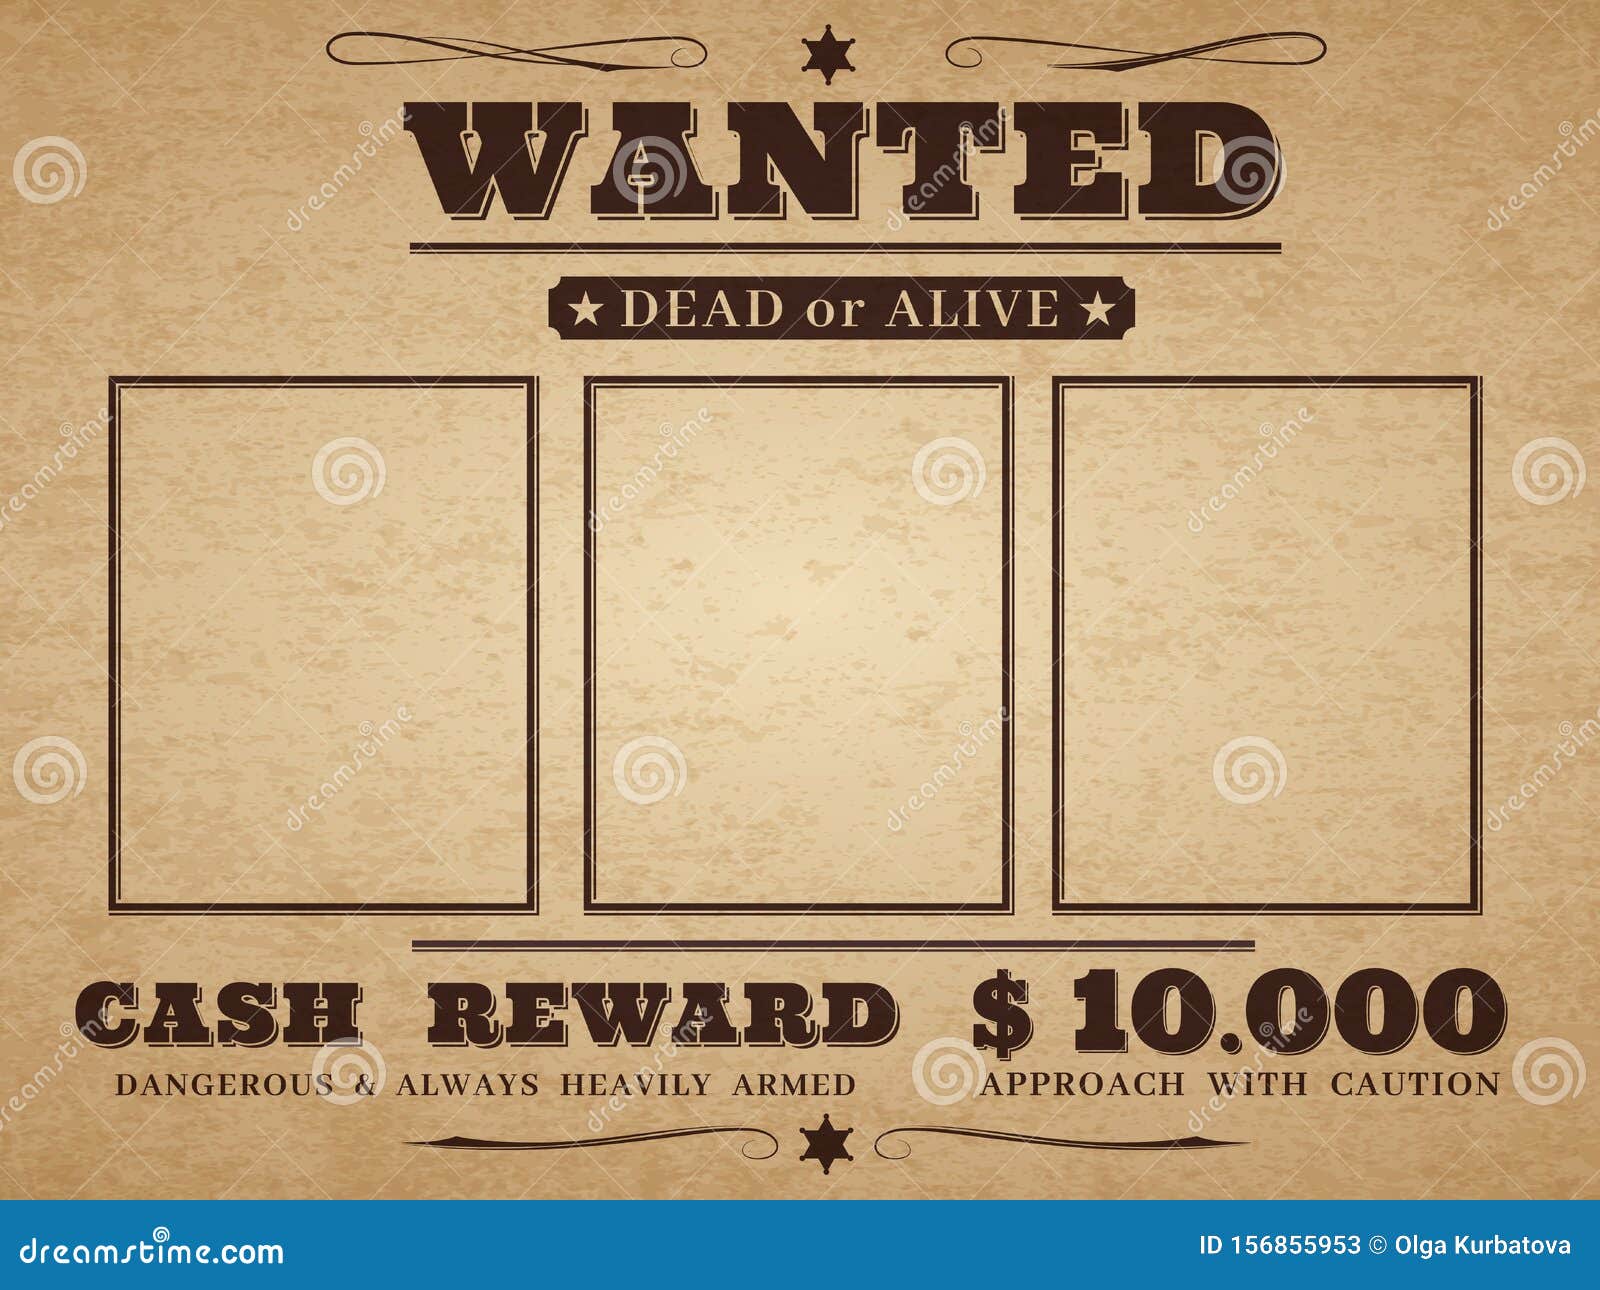 wanted cowboy poster. paper vintage texture distressed wild west western grunge frames with notice  blank template